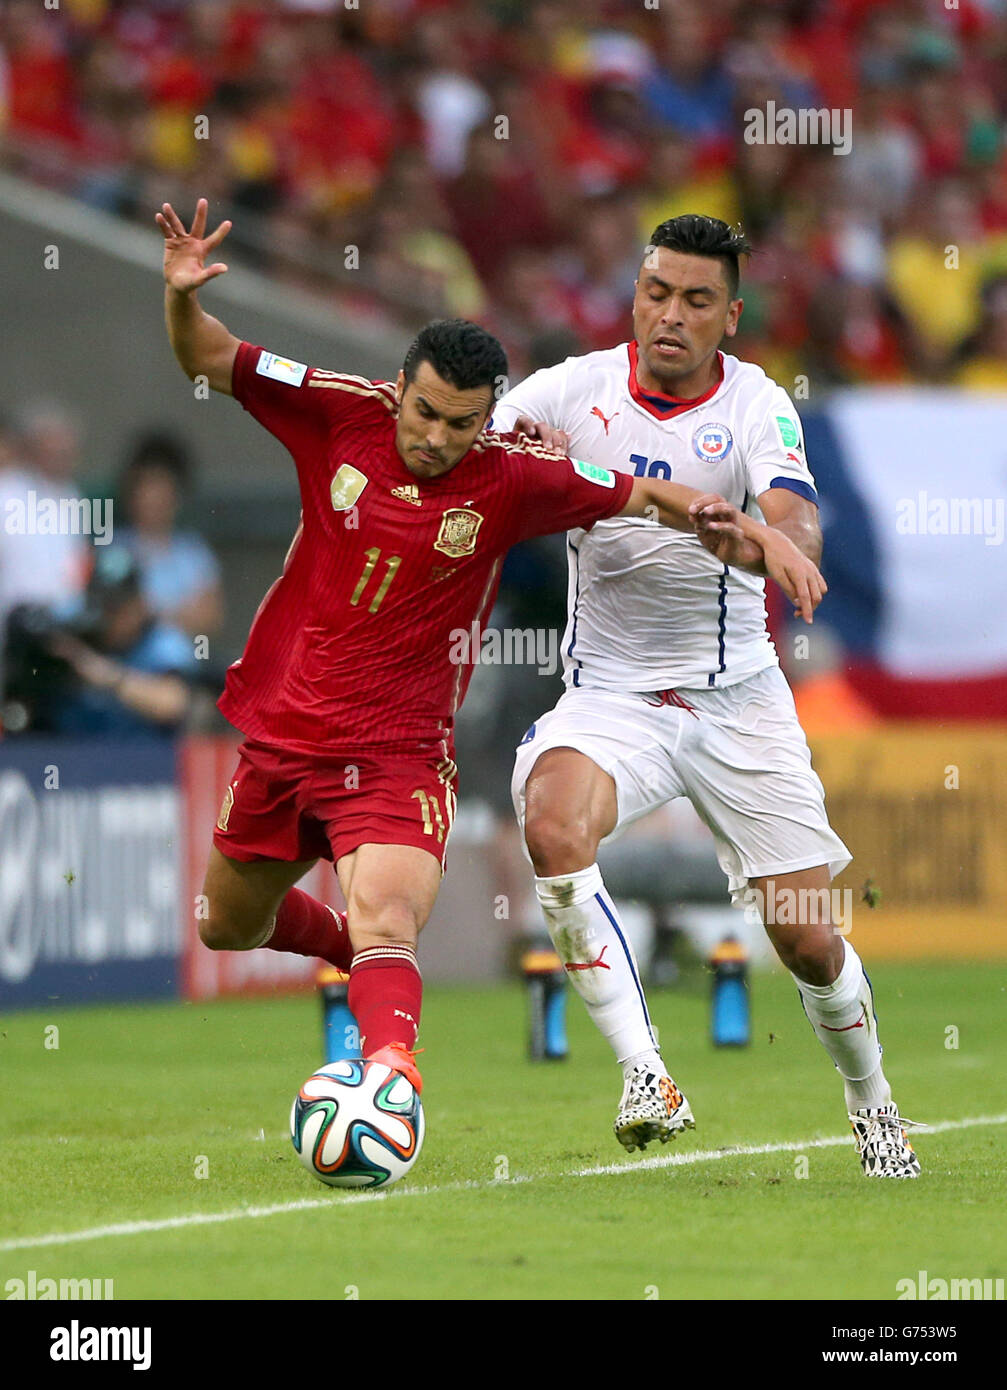 Soccer - FIFA World Cup 2014 - Group B - Spain v Chile - Maracana. Spain's Pedro (left) and Chile's Gonzalo Jara battle for the ball Stock Photo